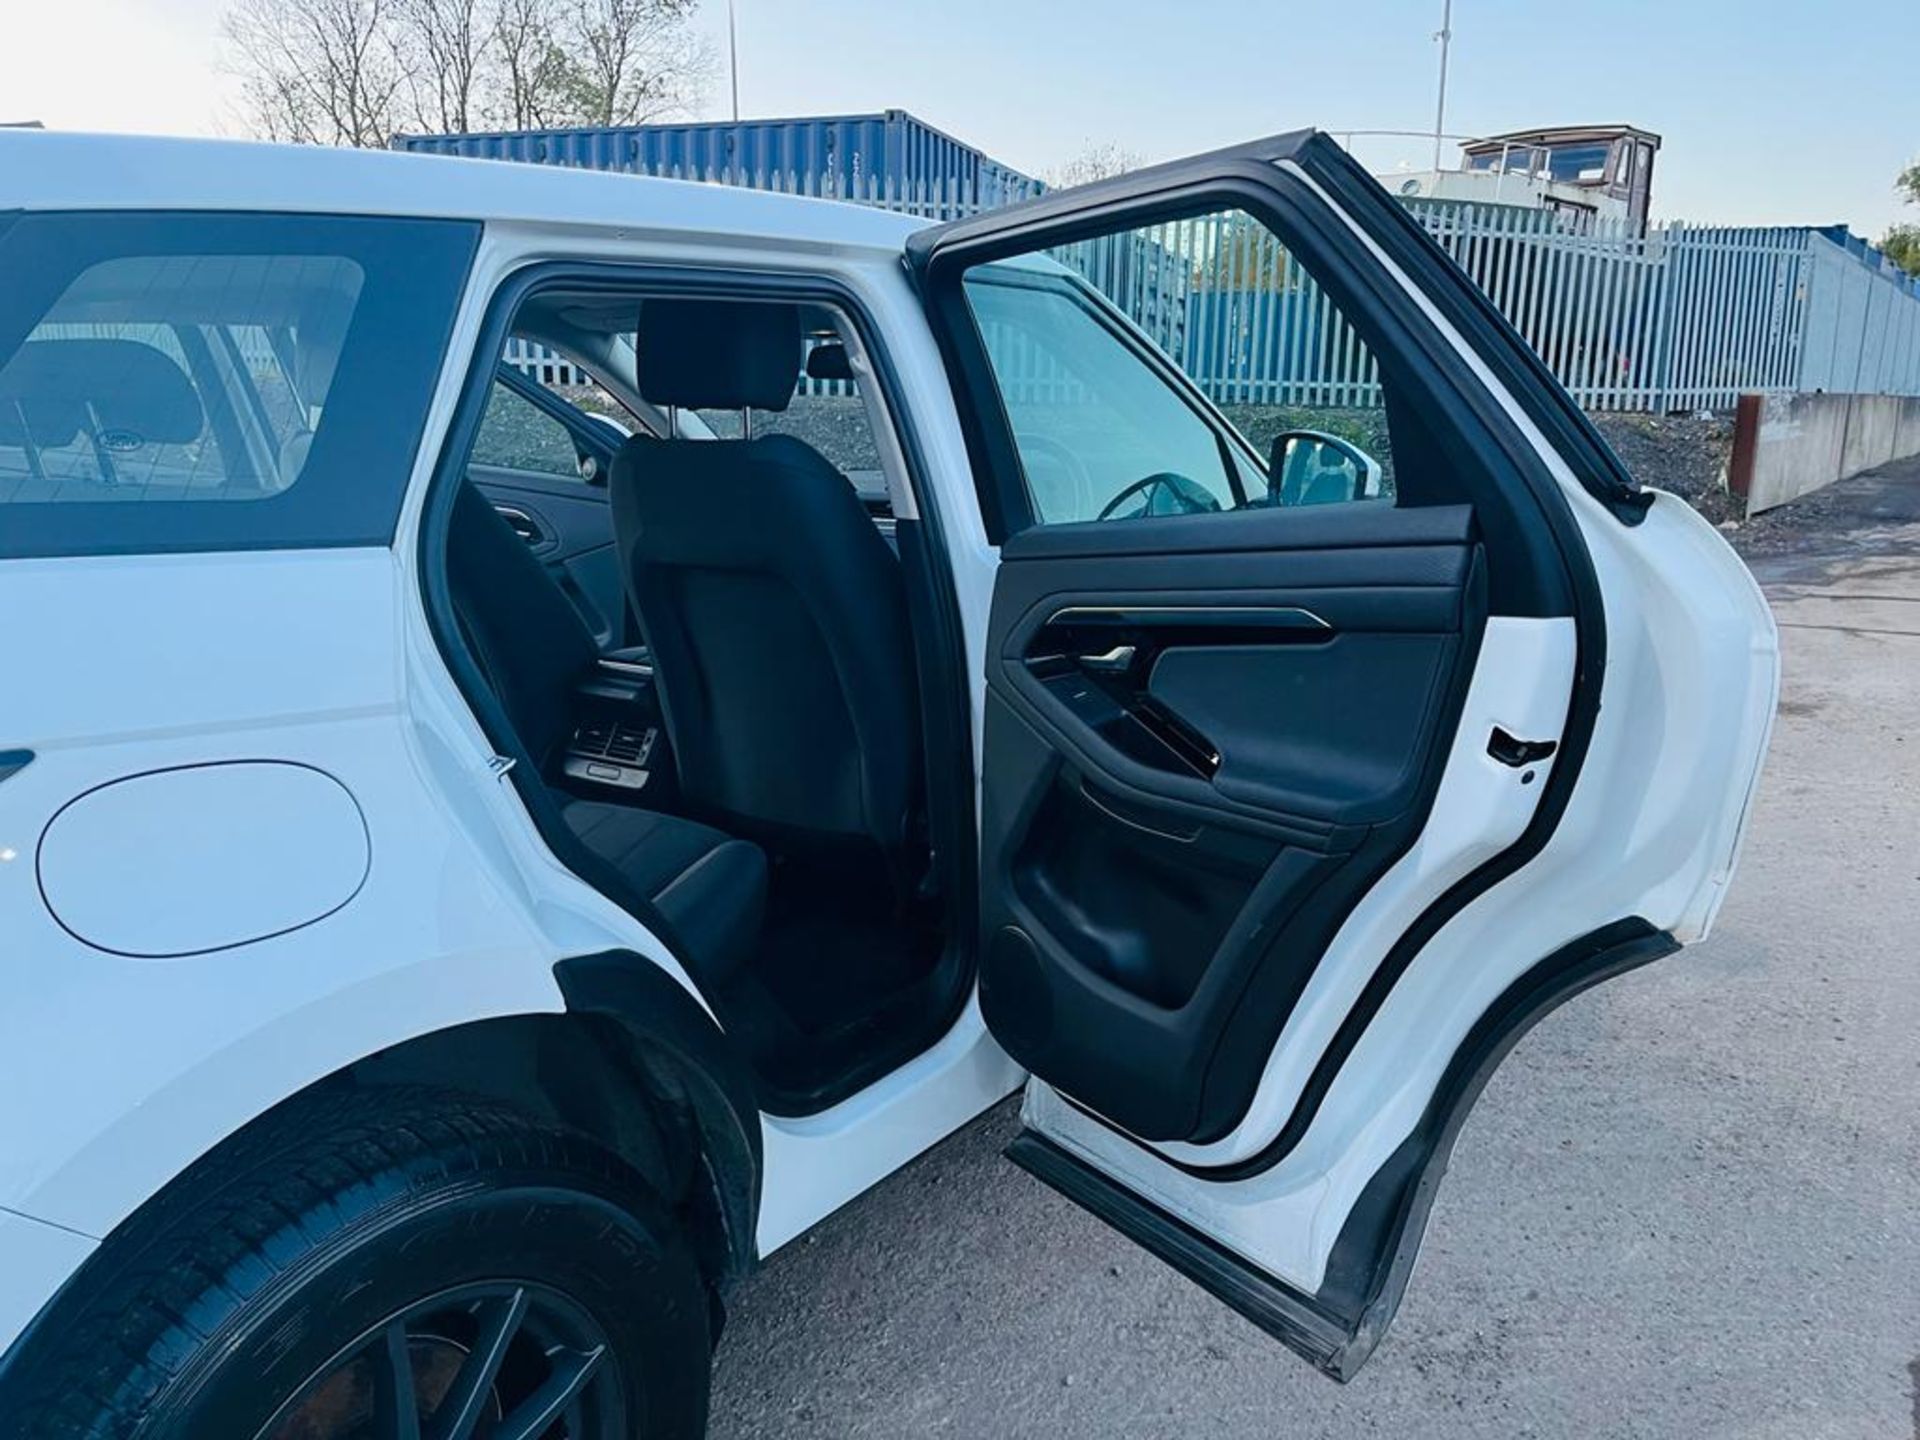 ** ON SALE ** Land Rover Range Rover Evoque 2.0 D150 2019 '69 Reg' A/C - Only 43,987 Miles - Image 23 of 32